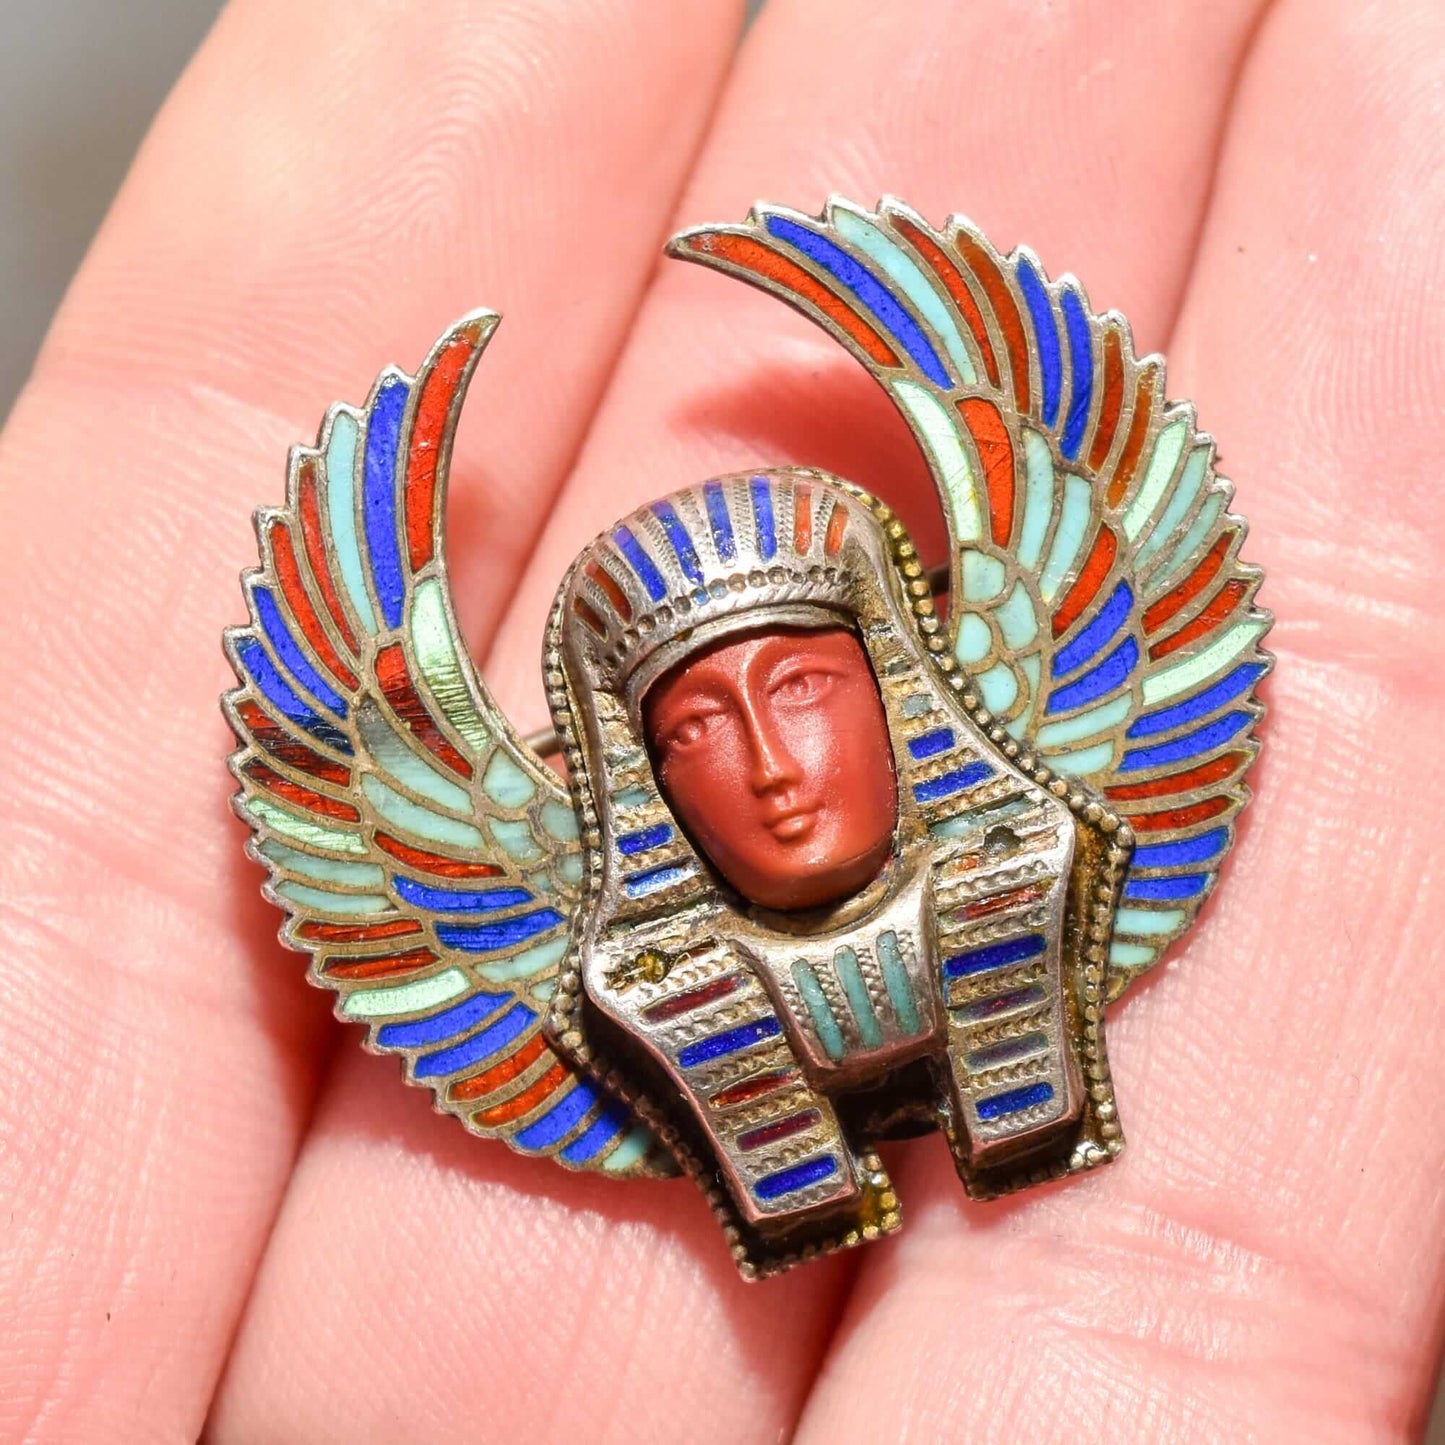 Egyptian Revival Enamel Brooch Pin, Colorful Winged Pharaoh Pin, Vintage Jewelry, 1.25"